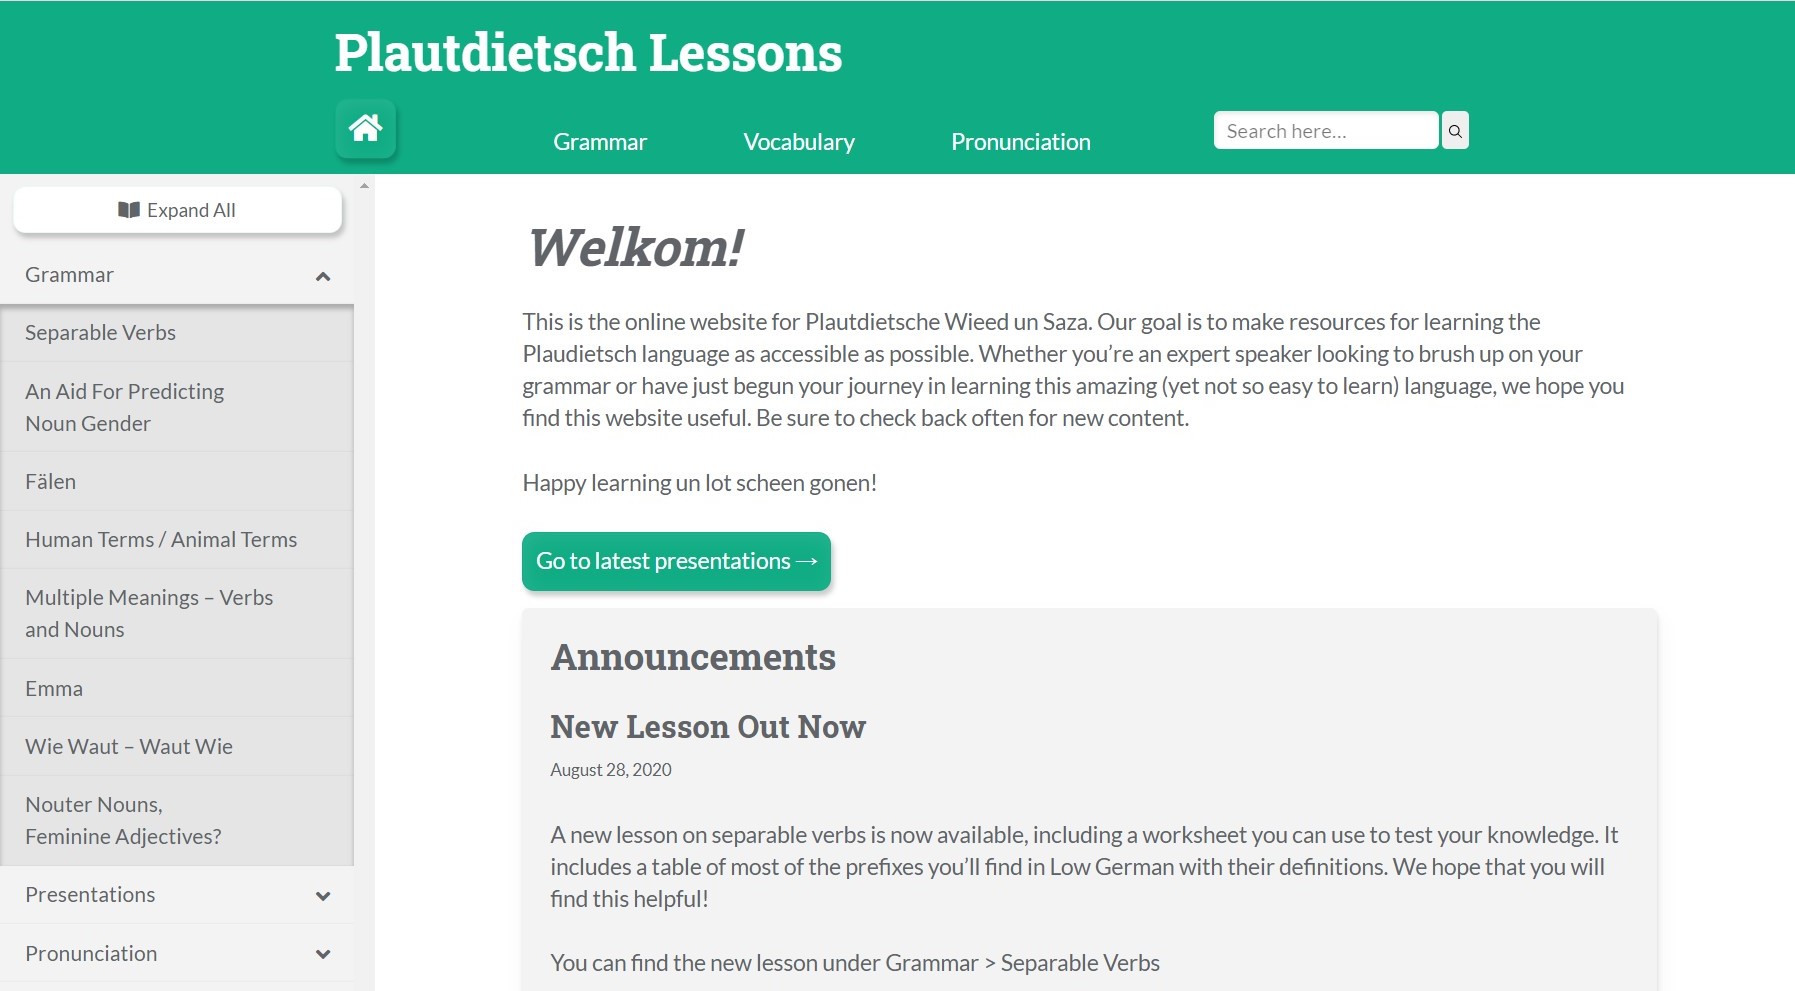 A page with lots of text. There is a prominent green header, a sidebar to the left, and a main section with a greeting for new visitors.